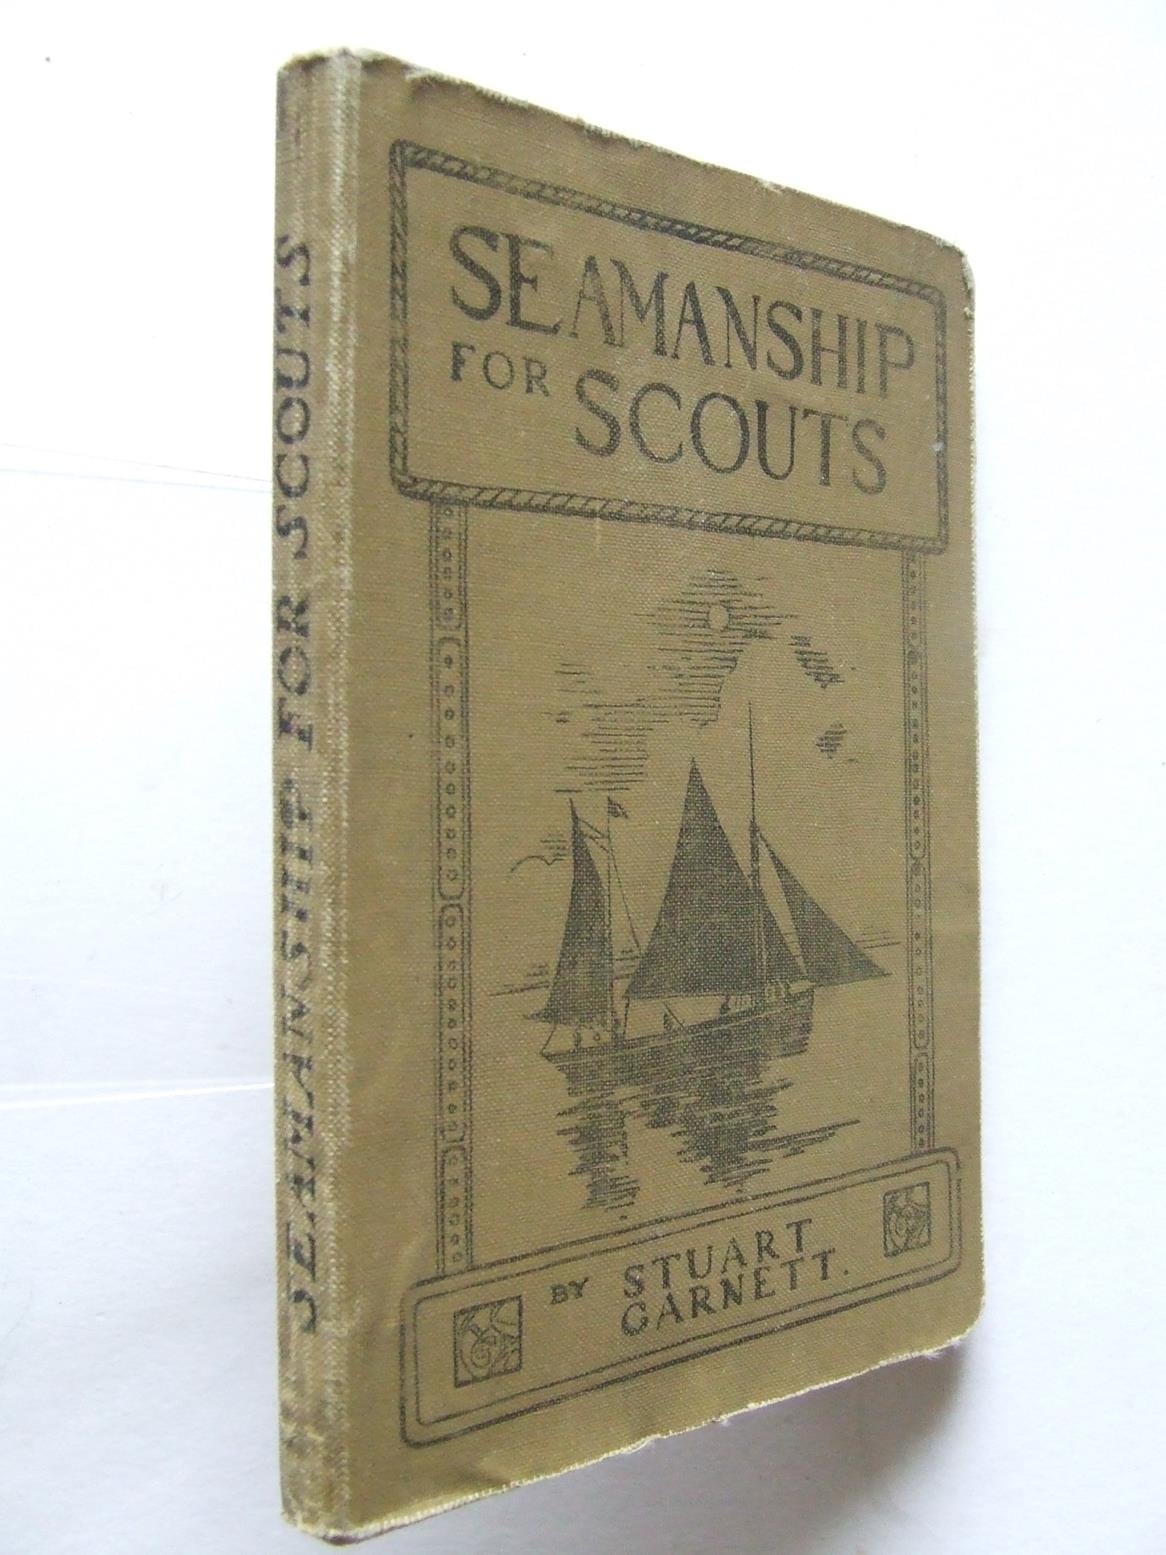 Seamanship for Scouts